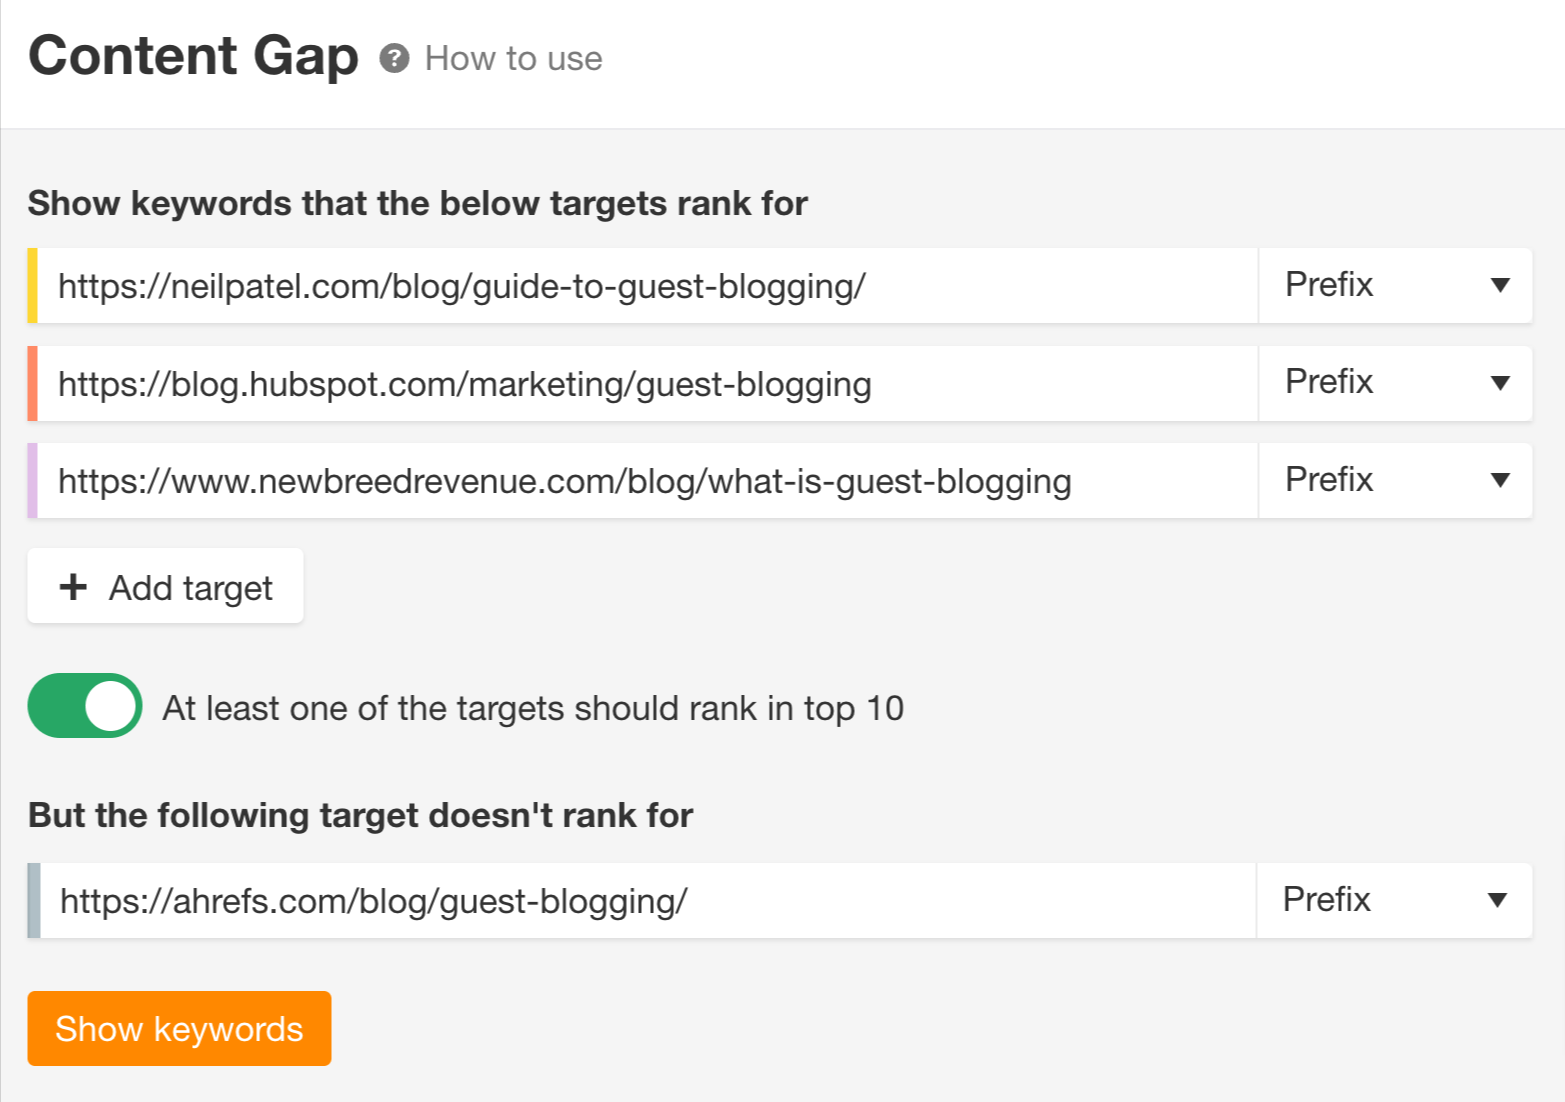 Content Gap tool to find guest blogging-related keywords Ahrefs' competitors rank for but the Ahrefs blog doesn't 